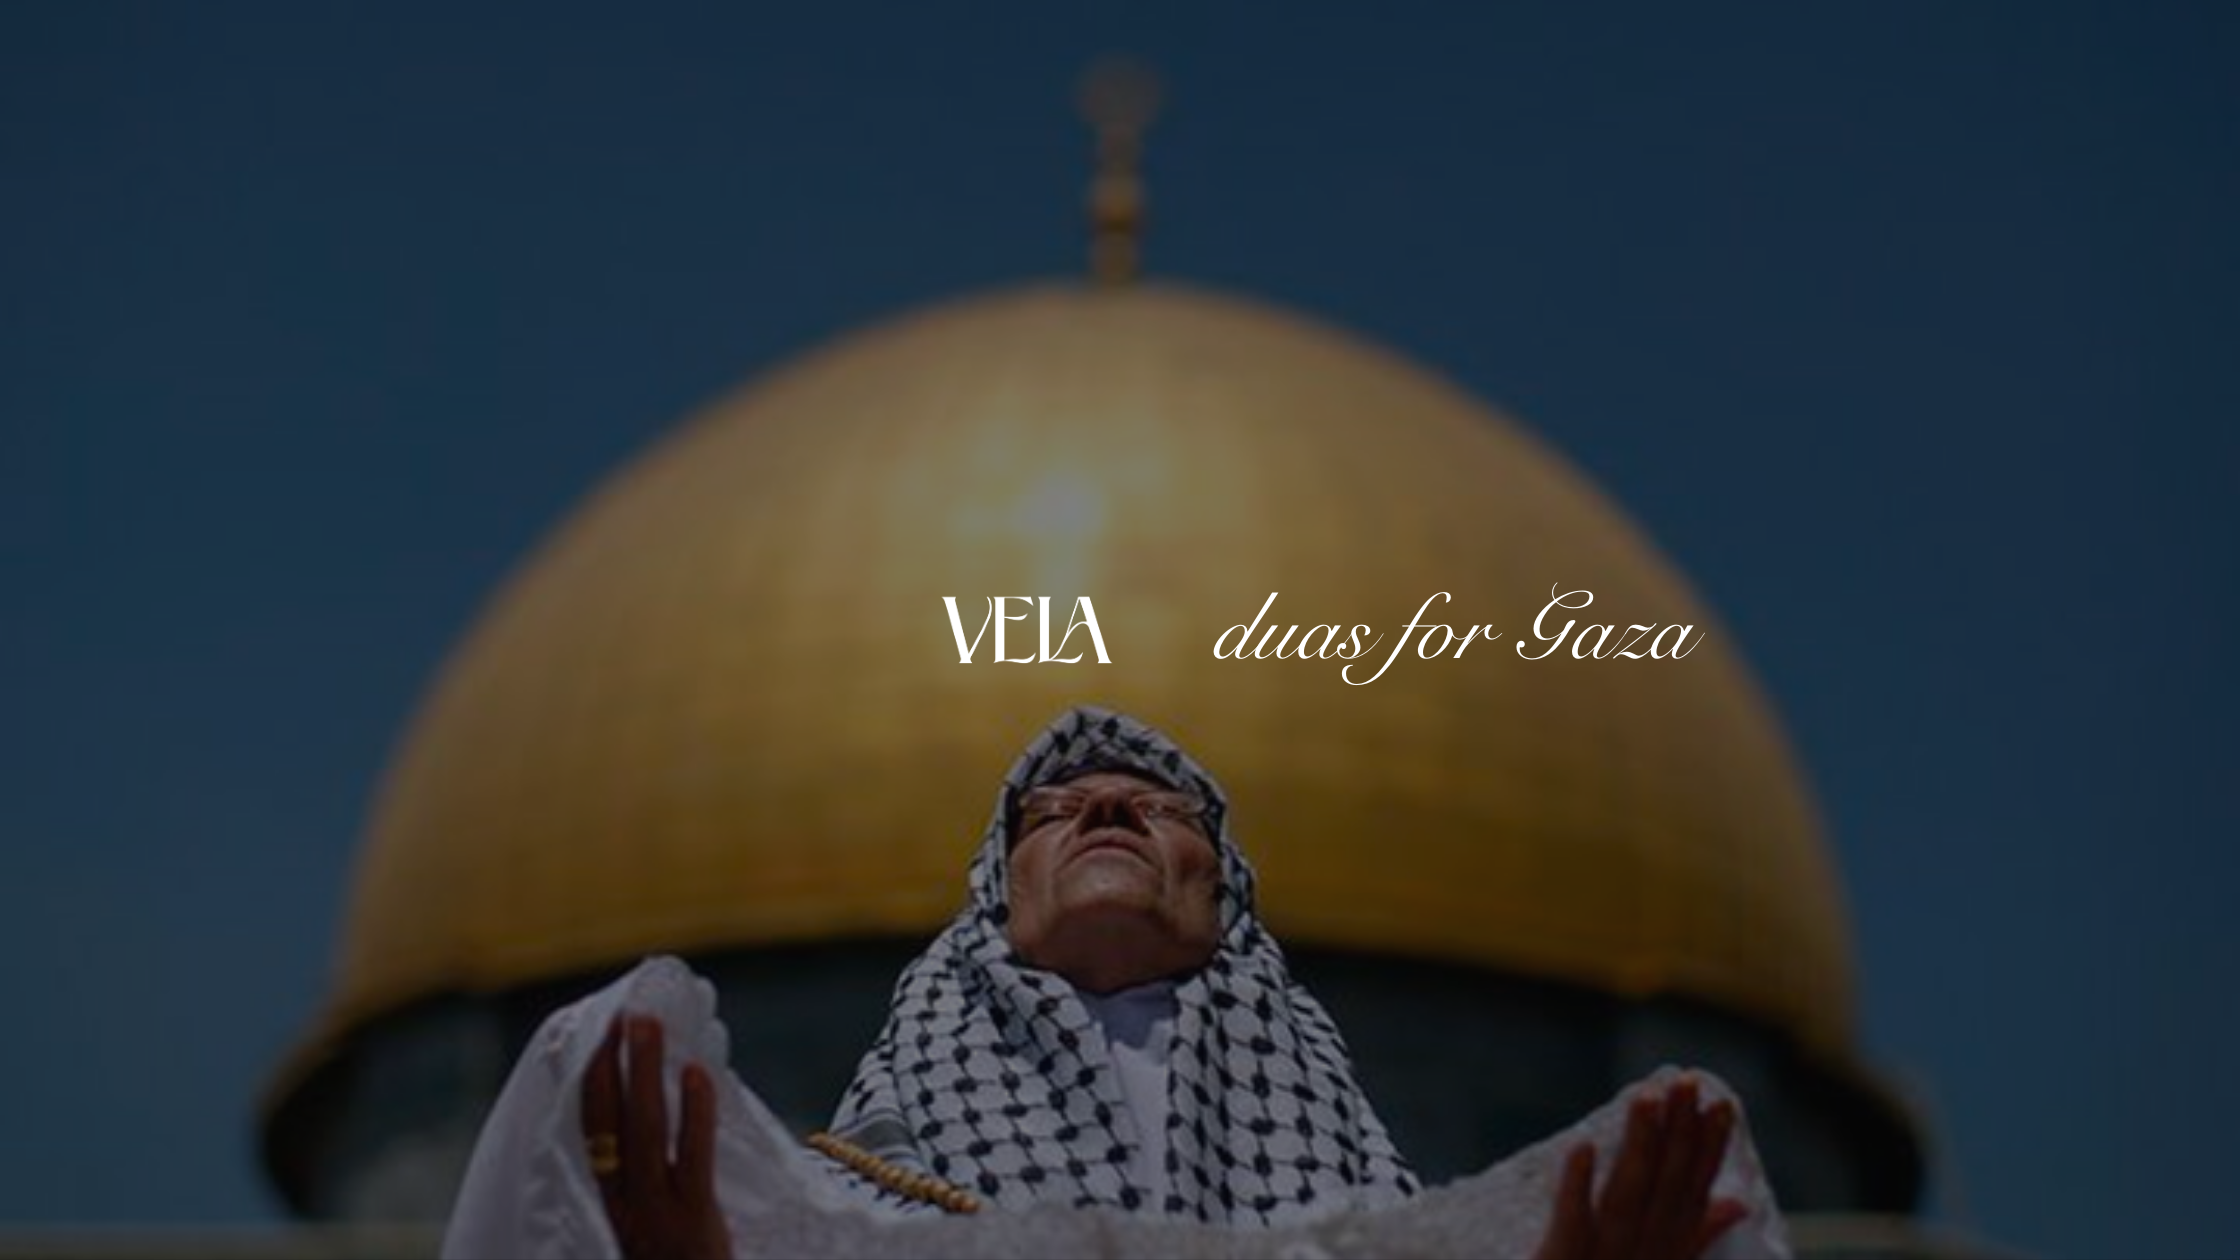 8 Affirmations About Allah & Gaza Based on His Names